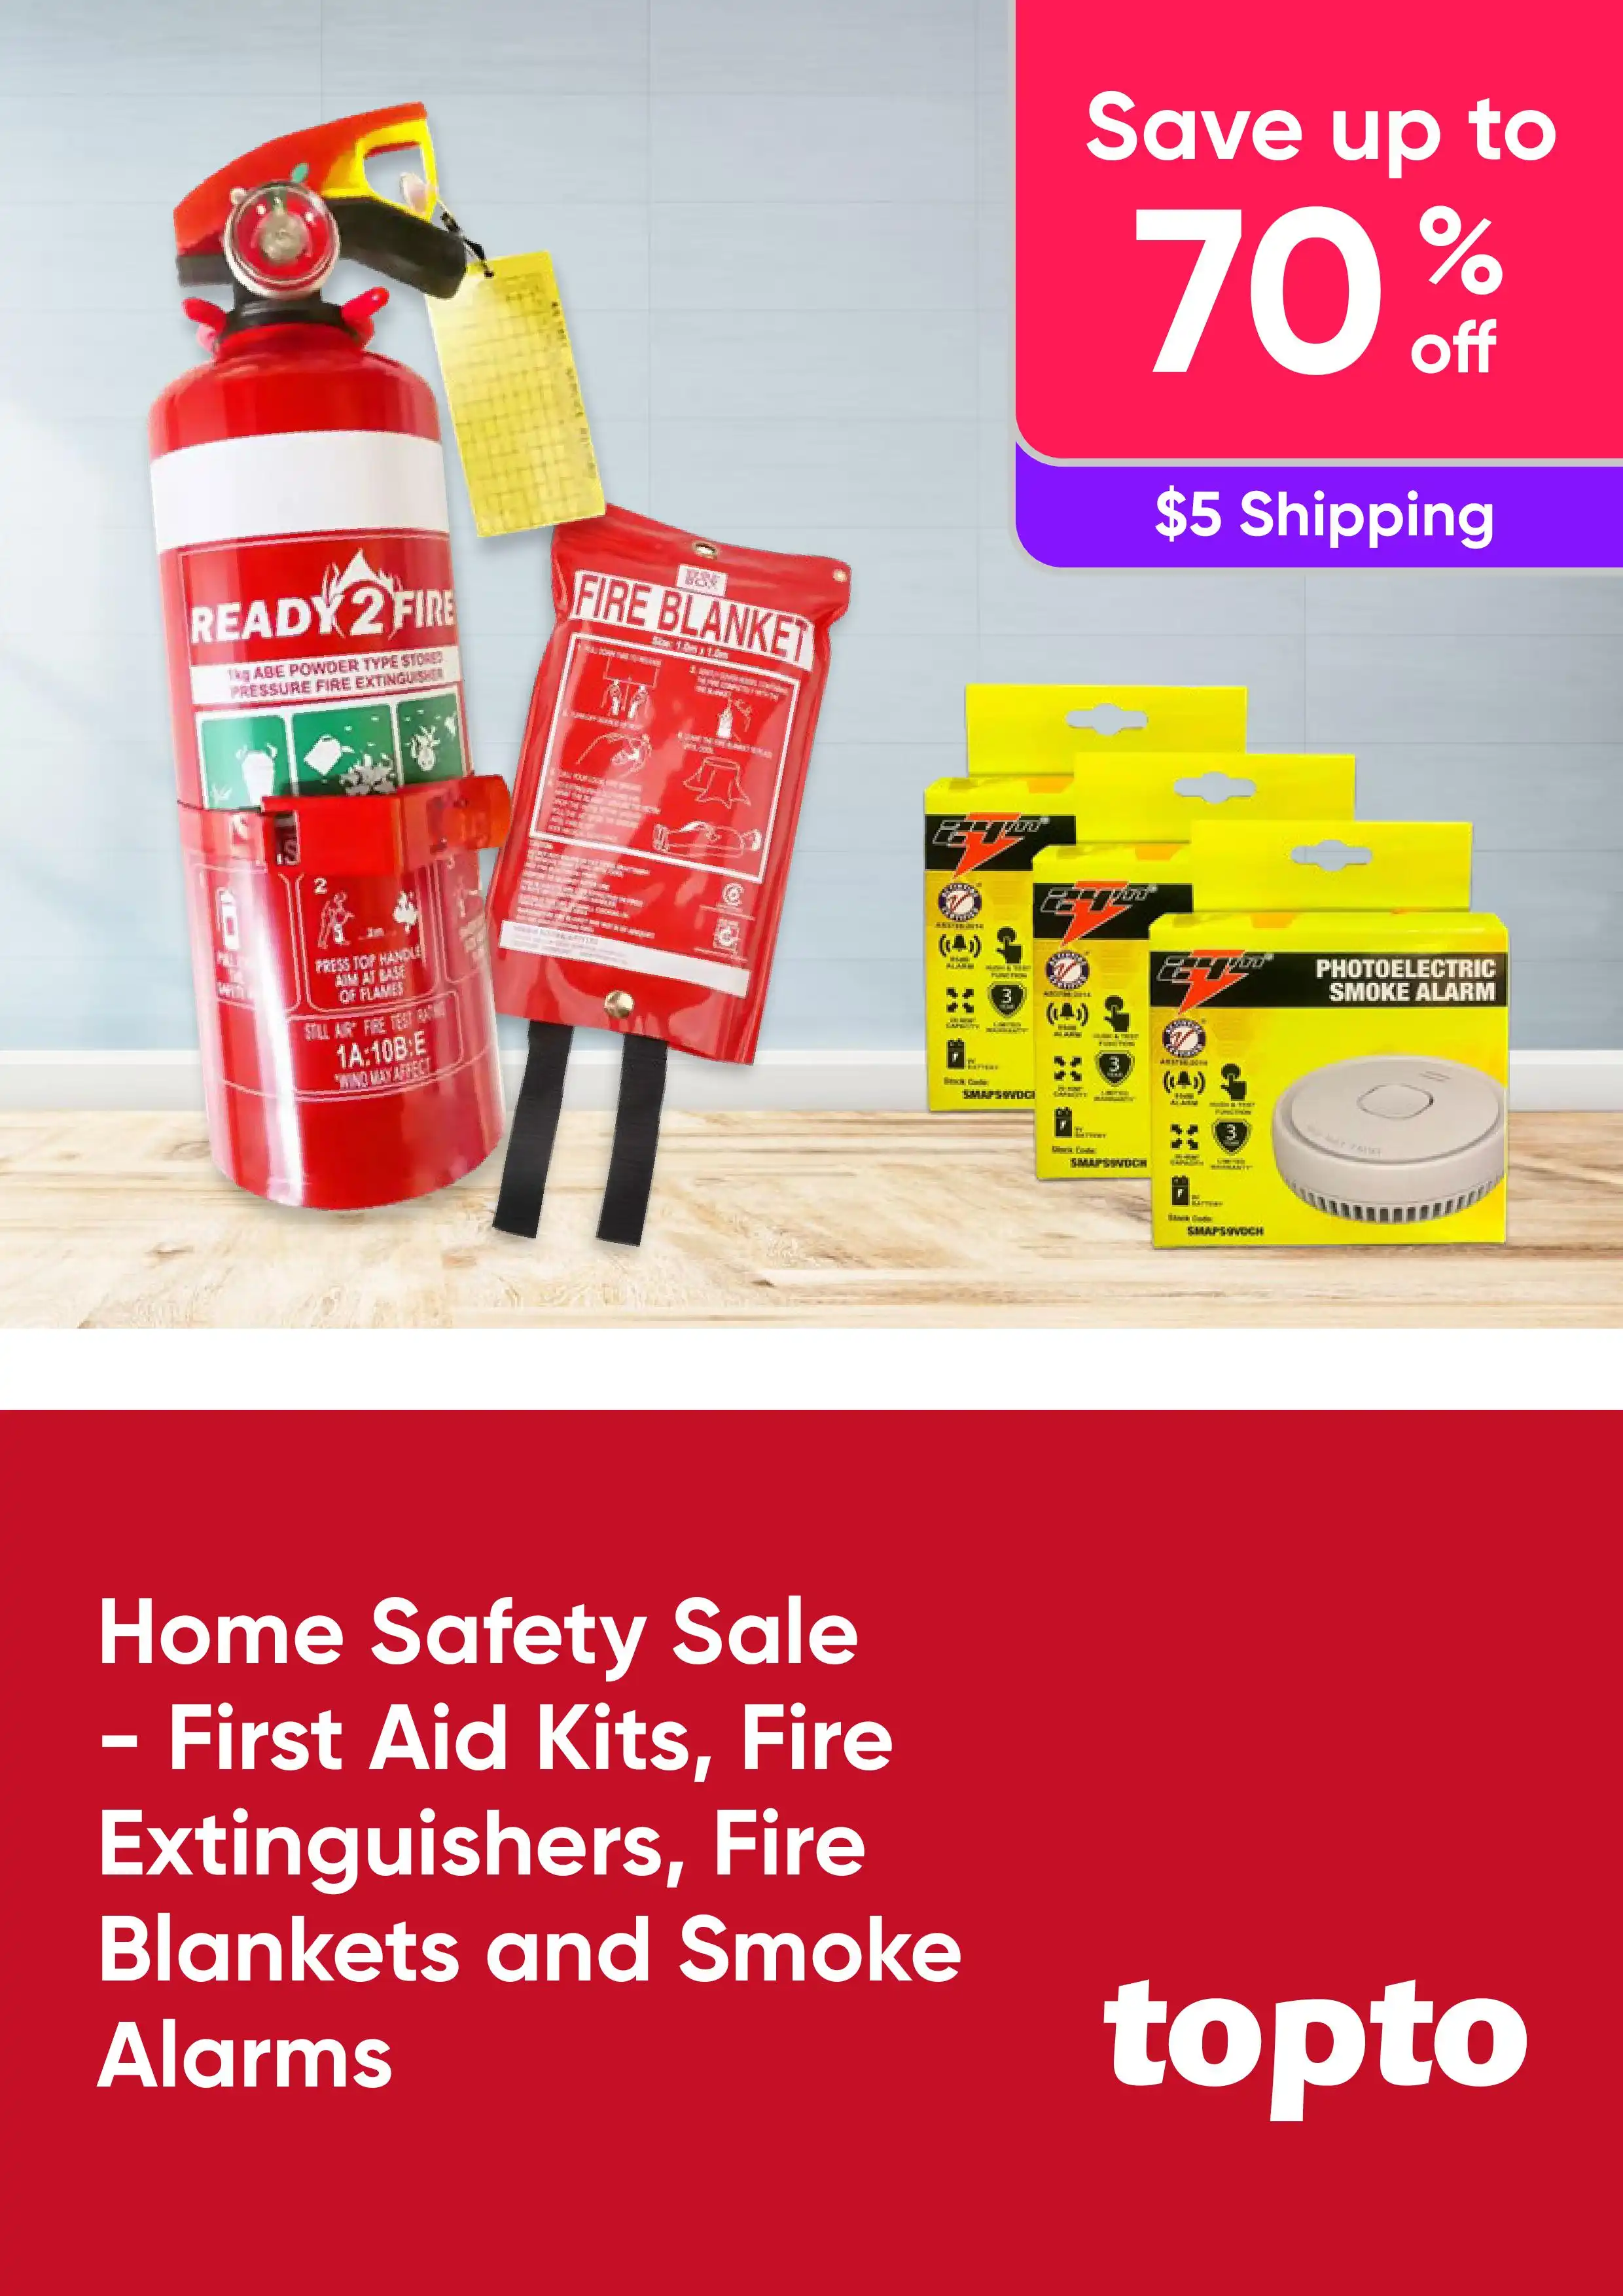 Home Safety Sale - First Aid Kits, Fire Extinguishers, Fire Blankets and Smoke Alarms - Save Up To 70% Off